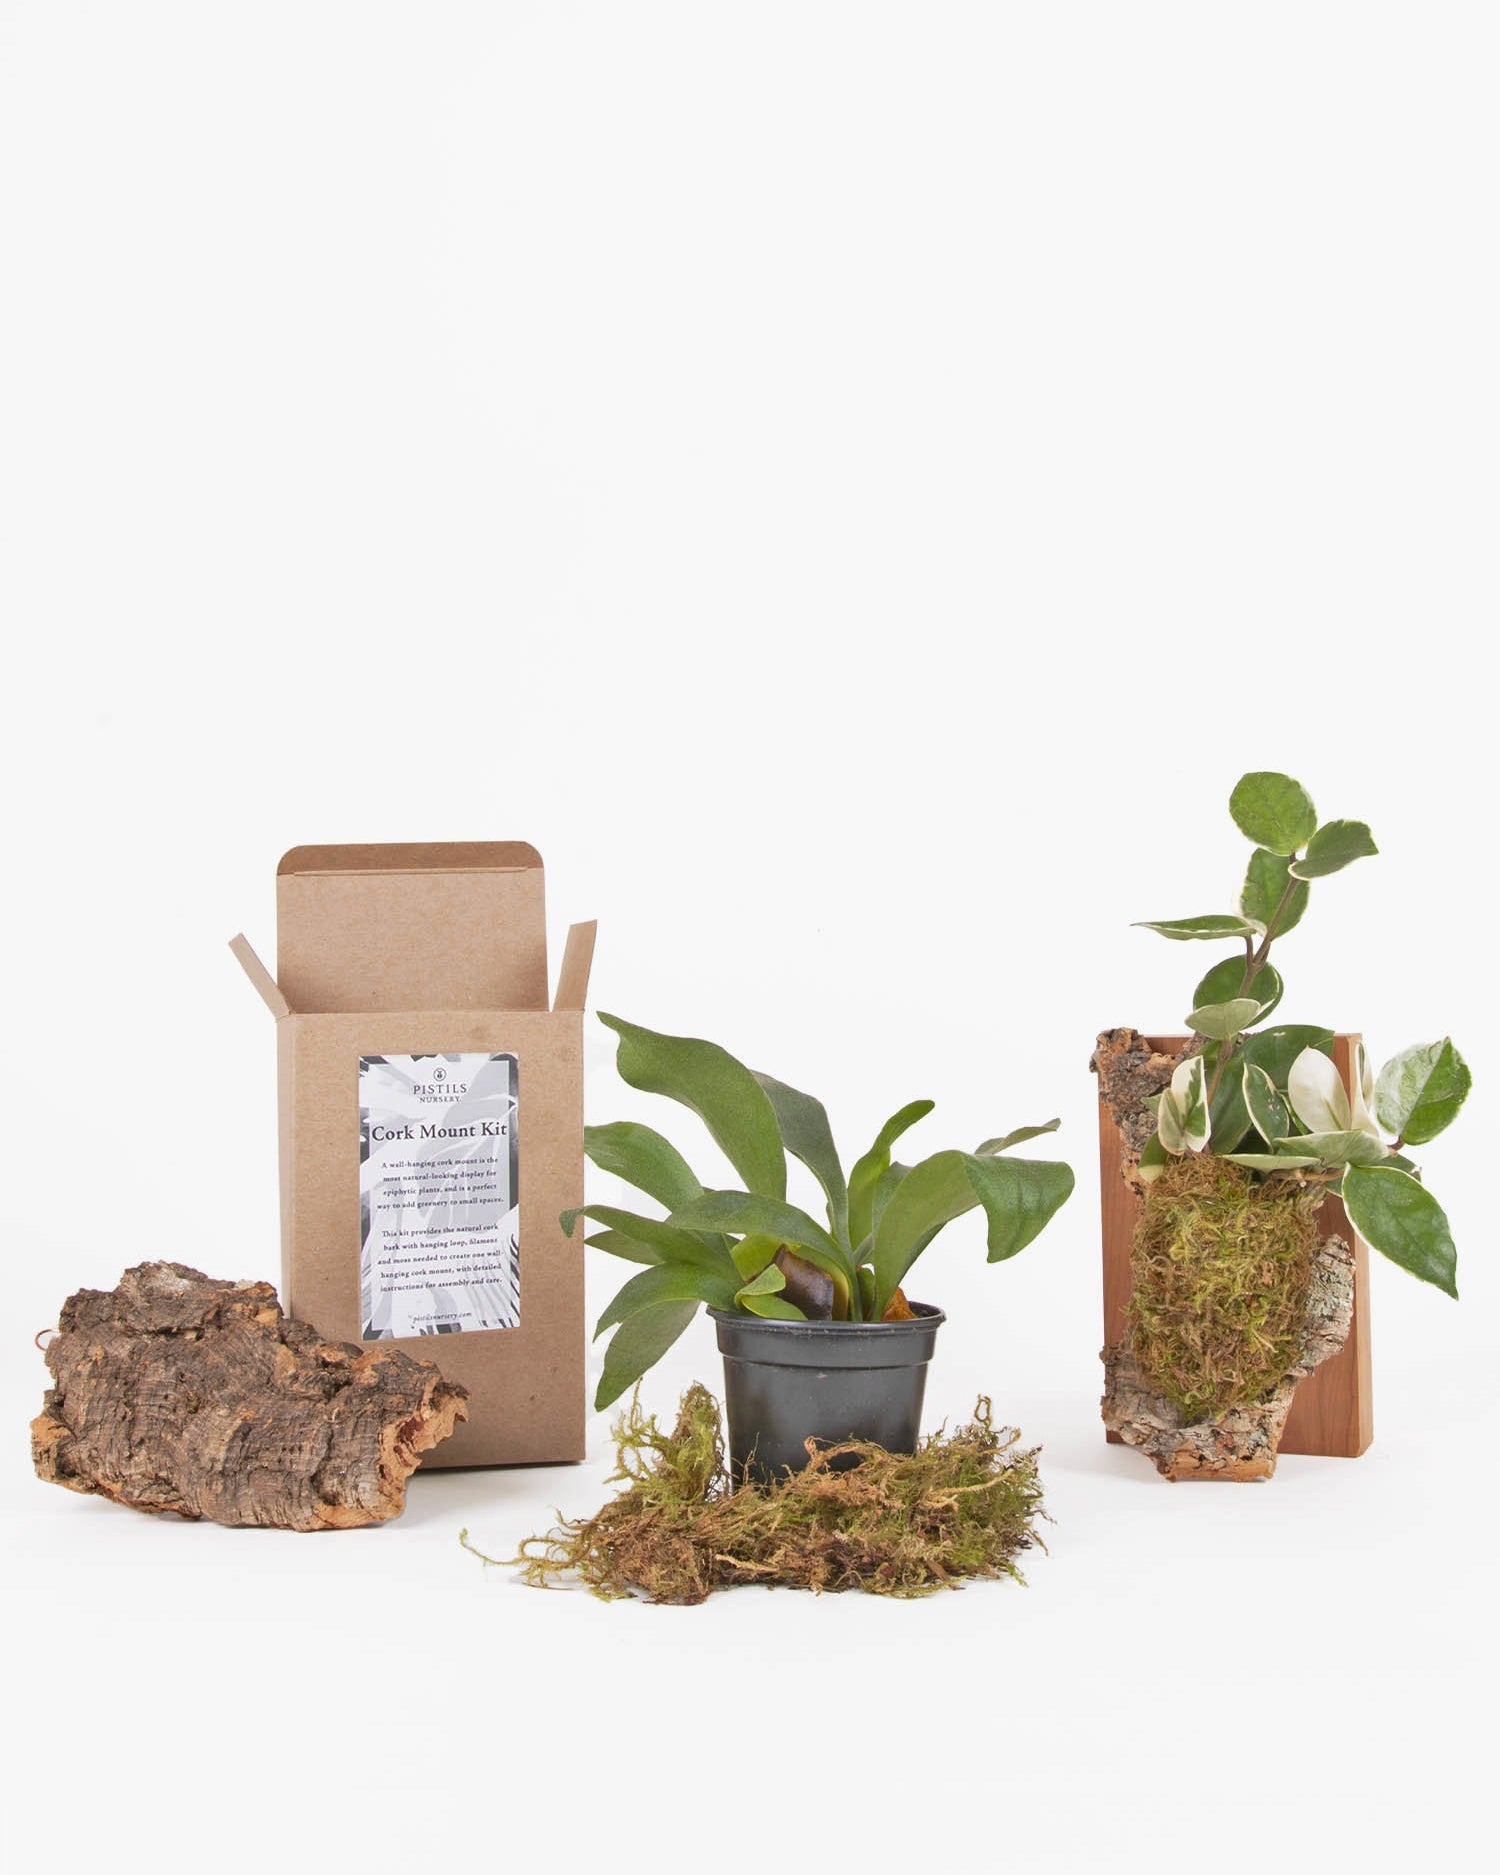 Staghorn Fern, Spaghnum moss, cork piece and finished cork mount next to open kit box